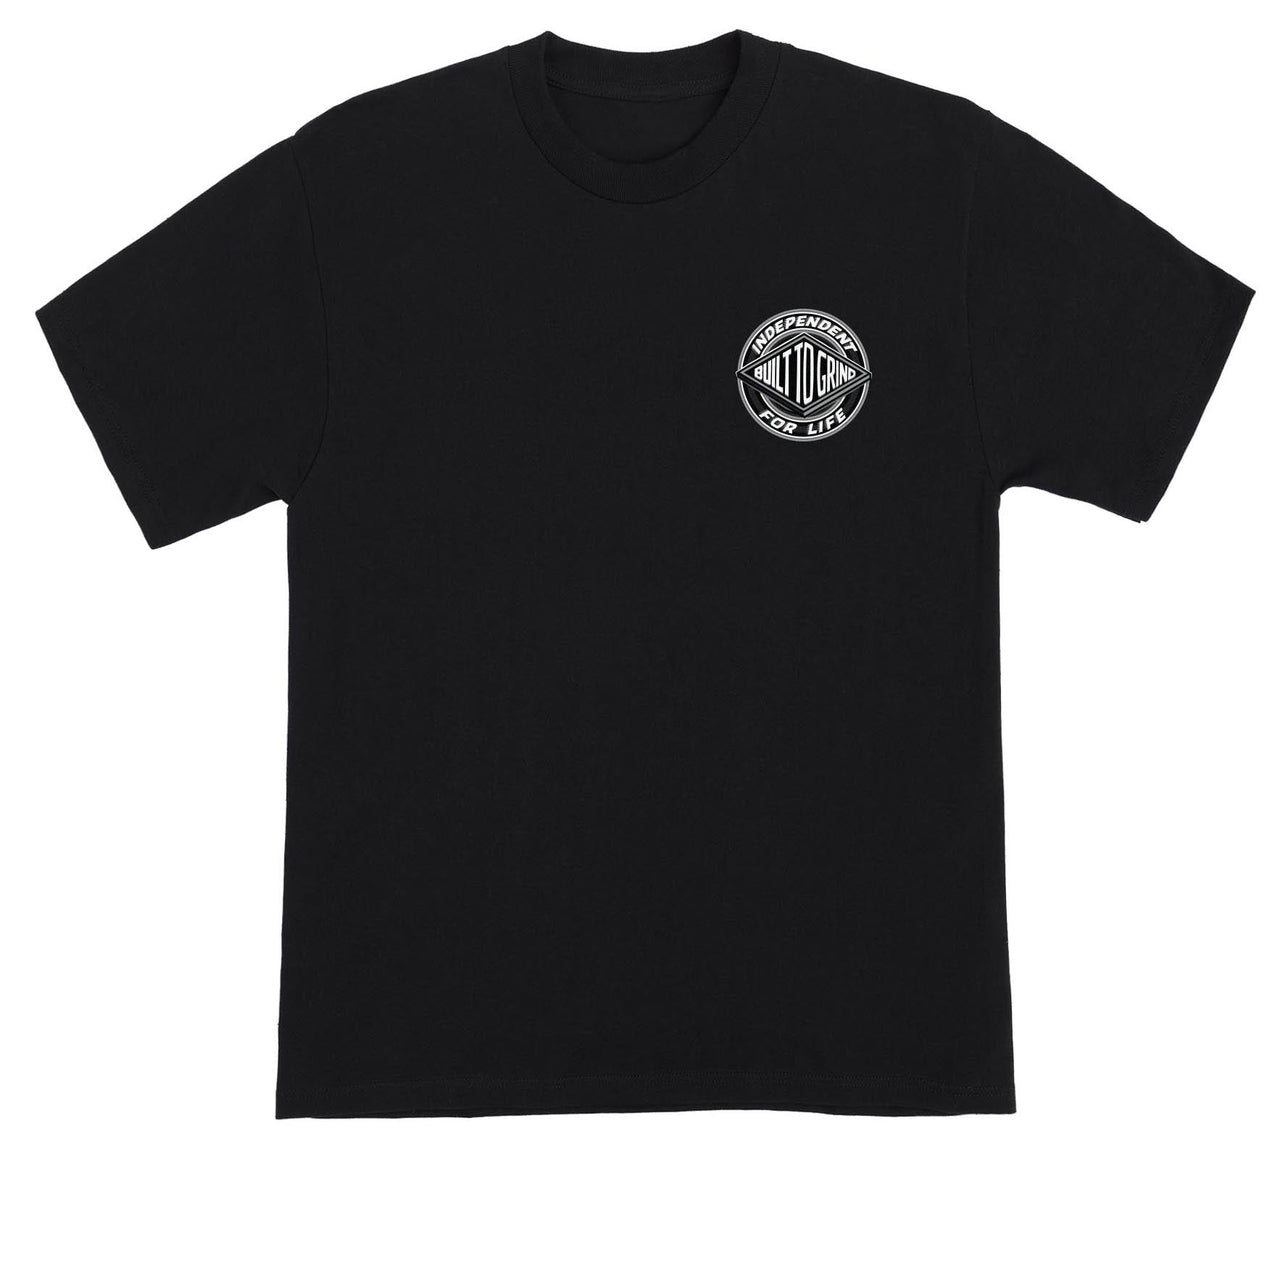 Independent For Life Clutch T-Shirt - Black image 2